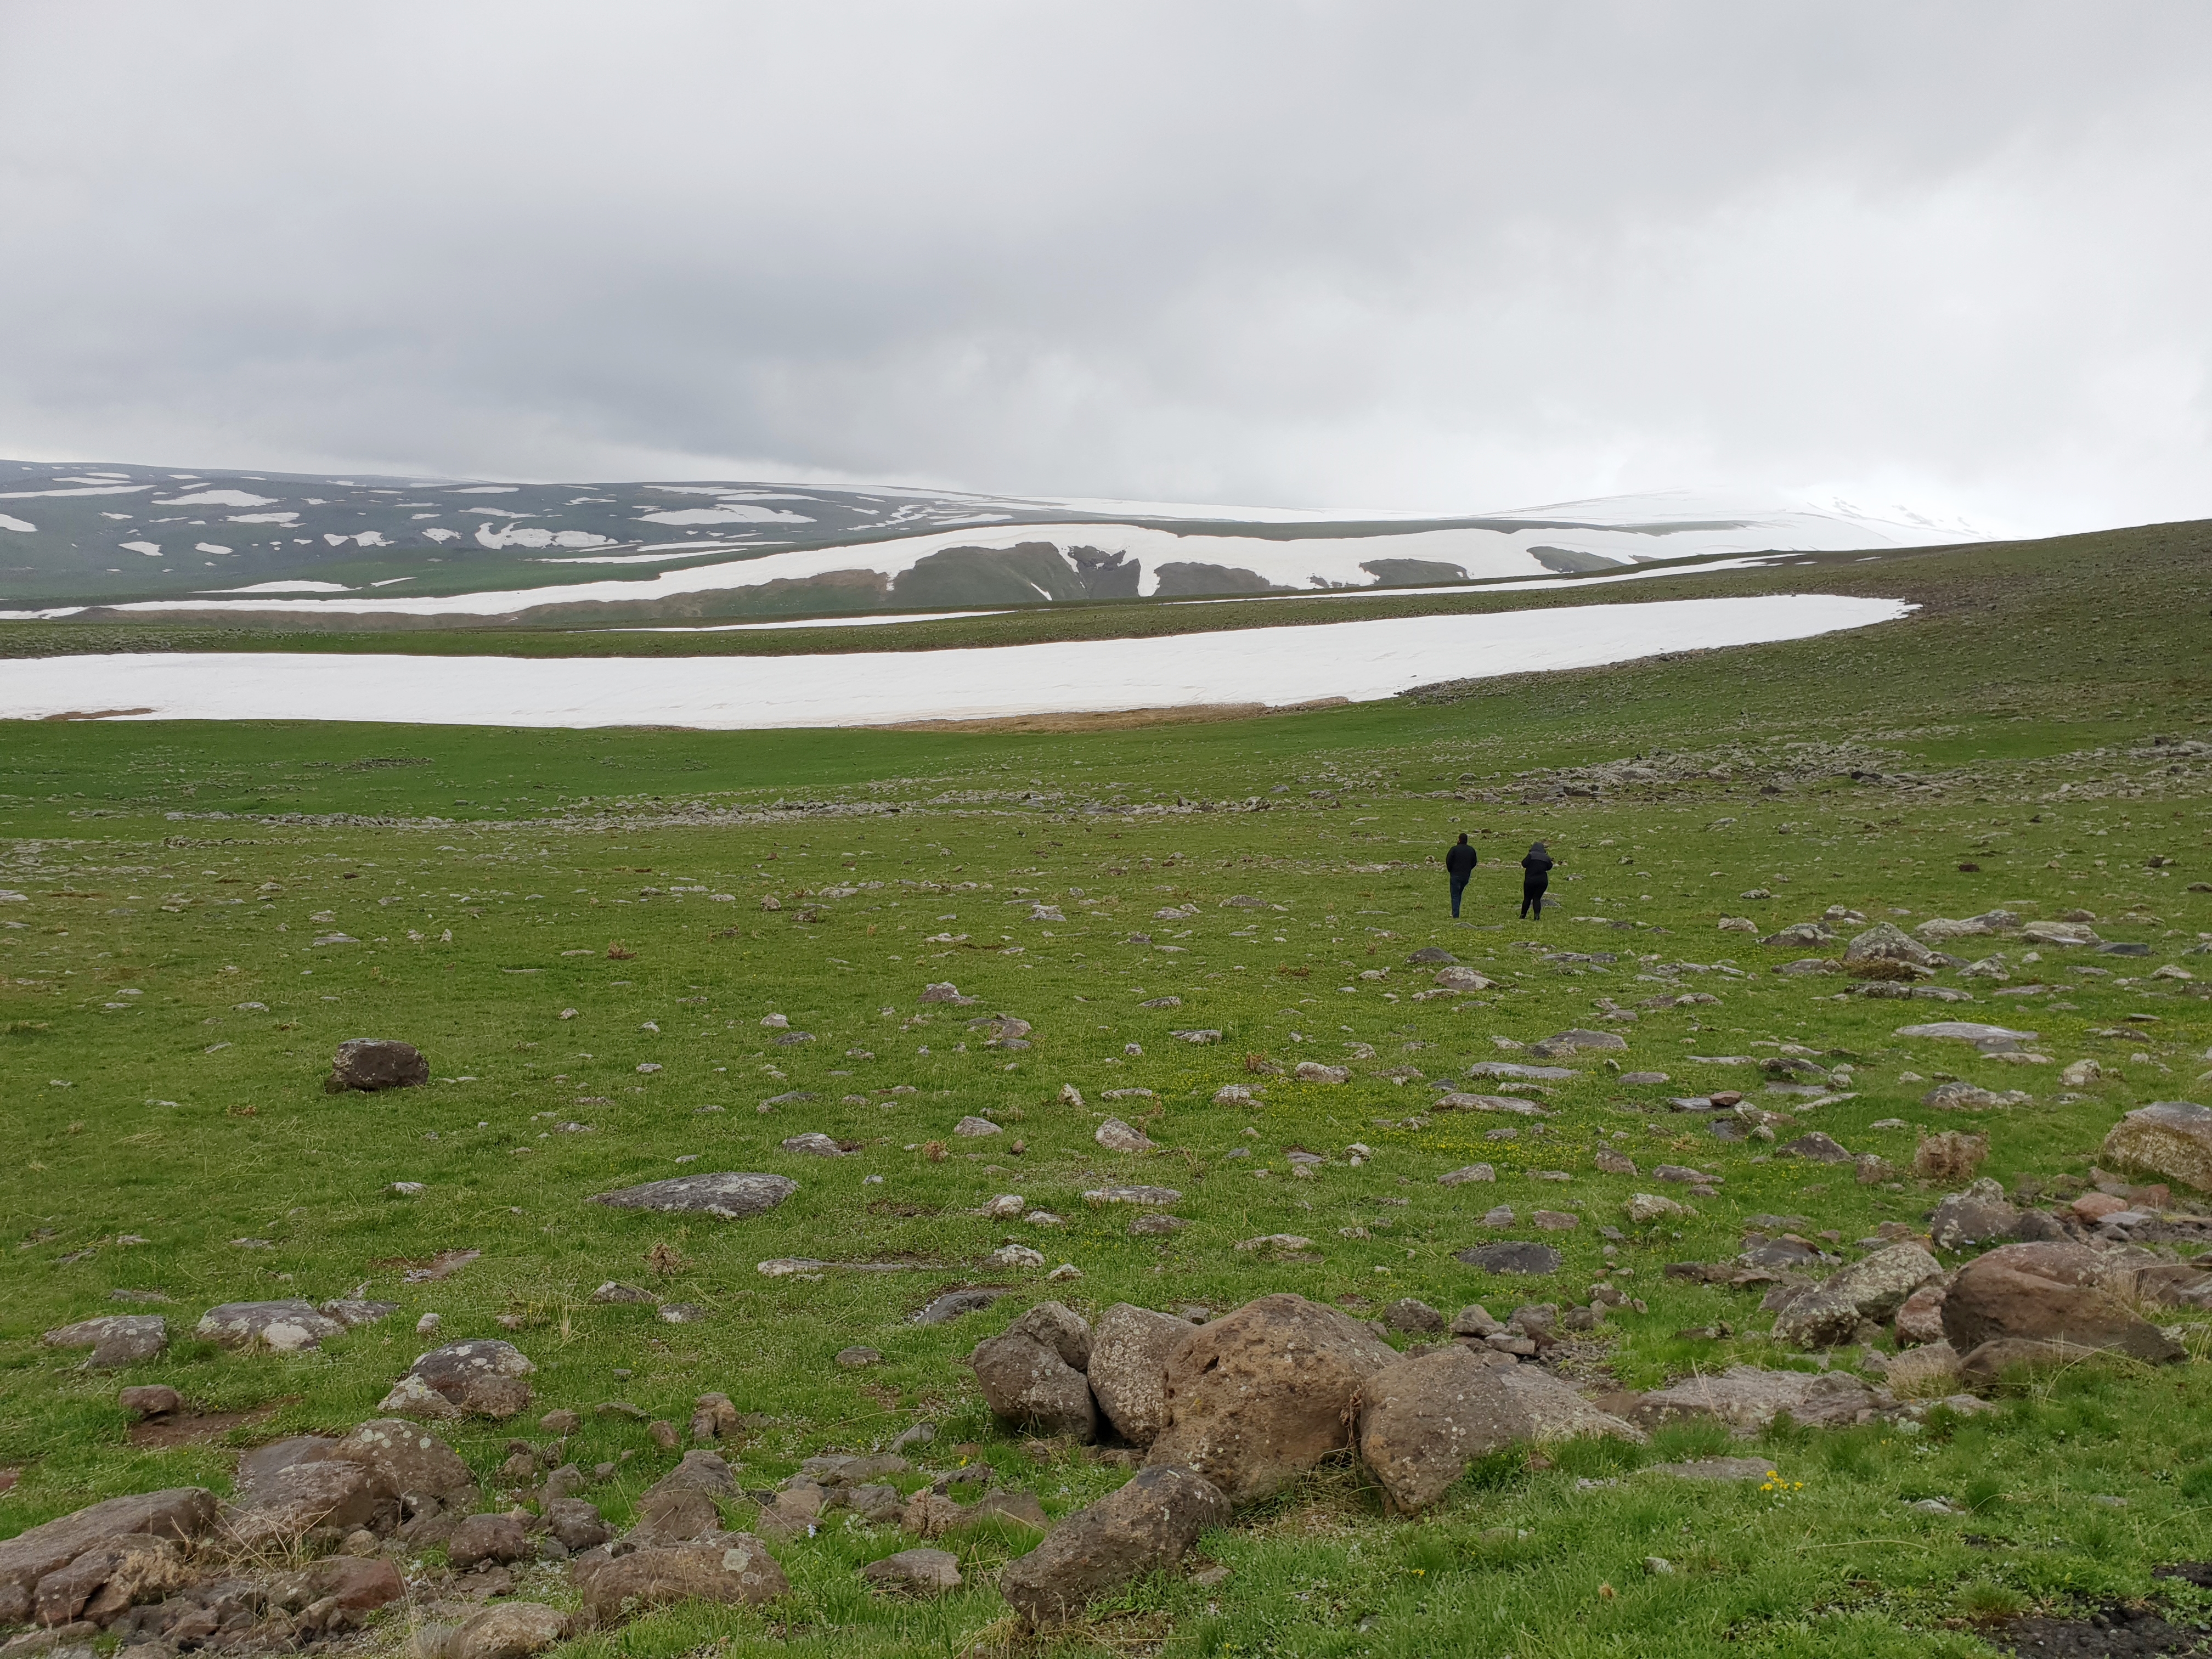 Stunning view at the first stop of the Mount Aragats tour in Armenia